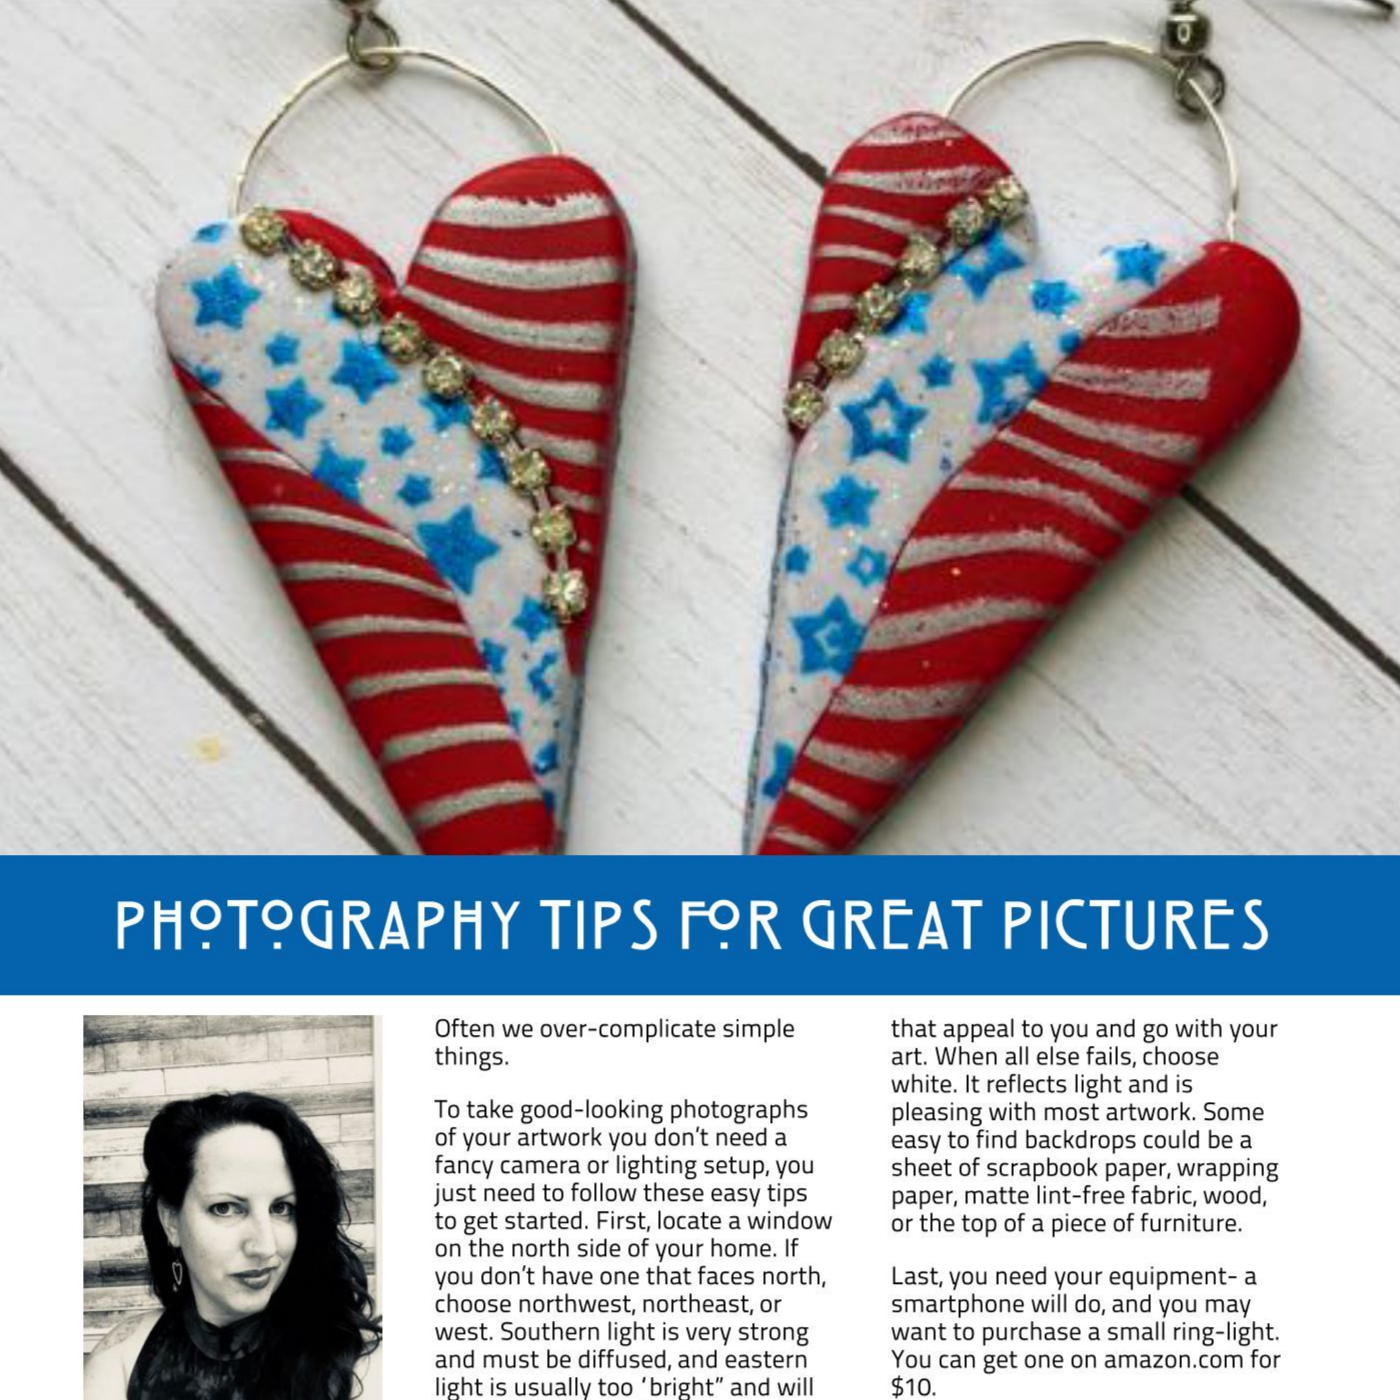 PCU digital magazine with polymer clay tutorials and articles- September issue Volume 19 - Polymer Clay TV tutorial and supplies